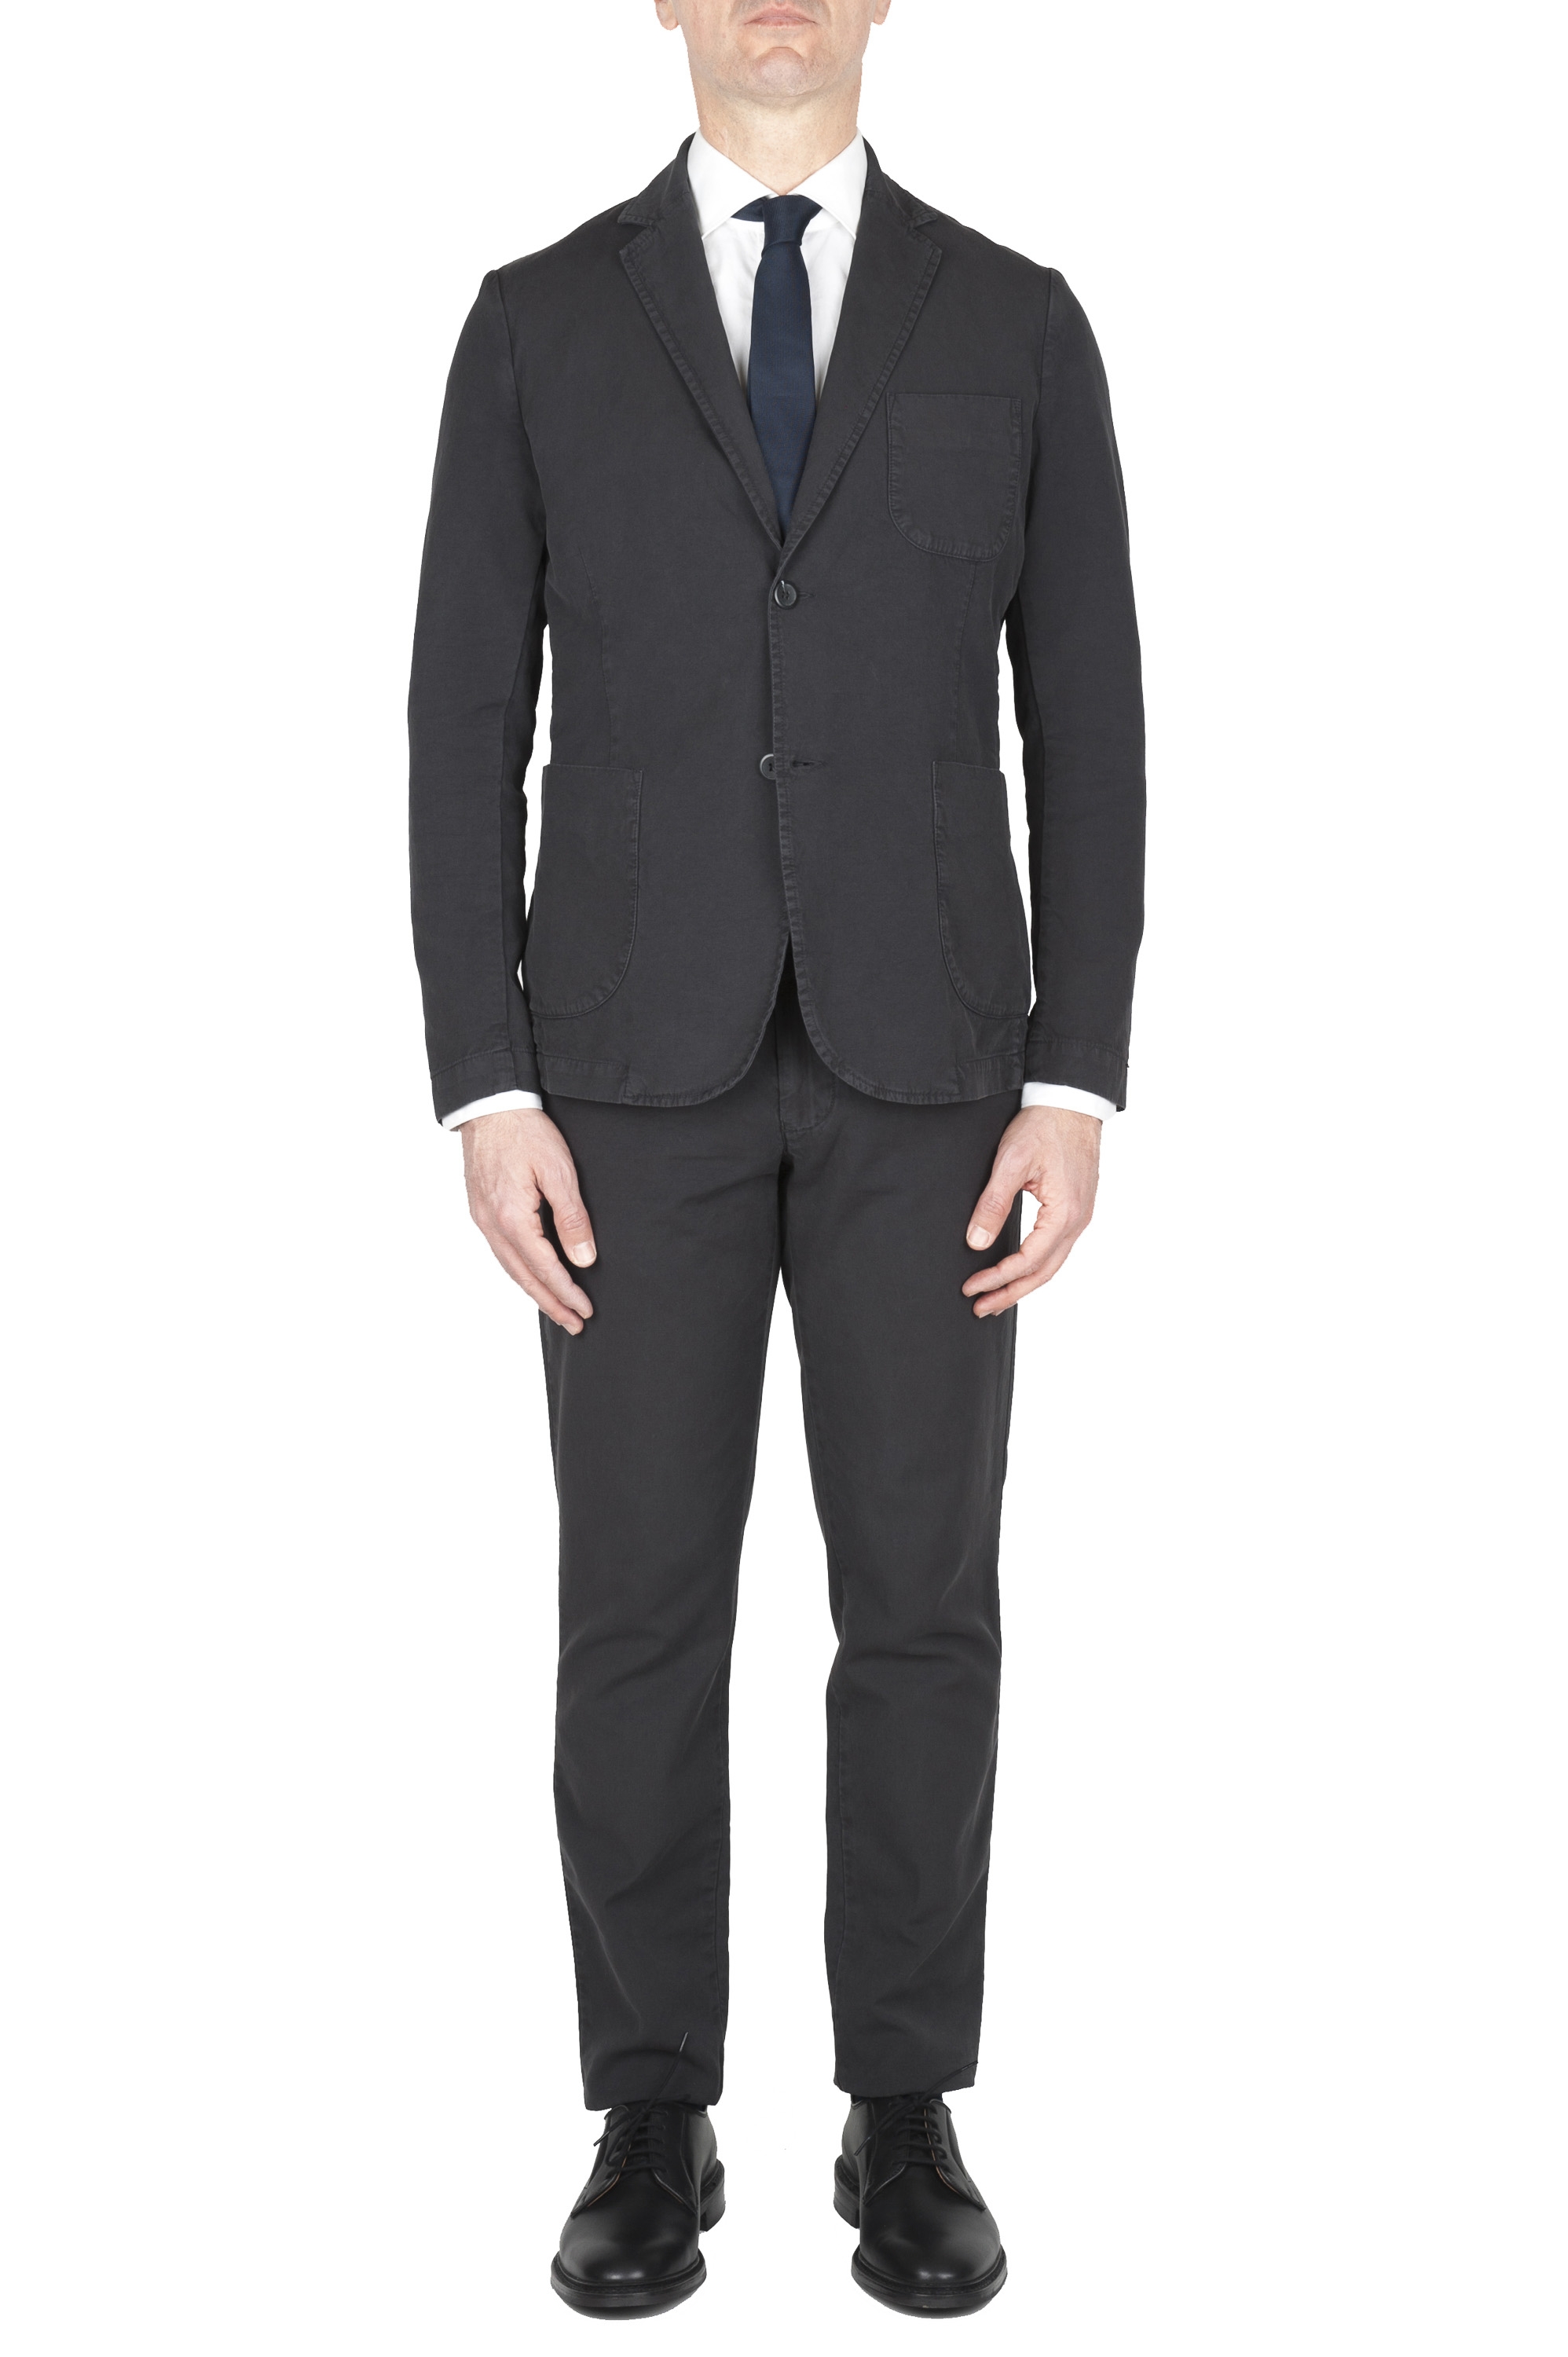 SBU 03050_2020AW Anthracite cotton sport suit blazer and trouser 01